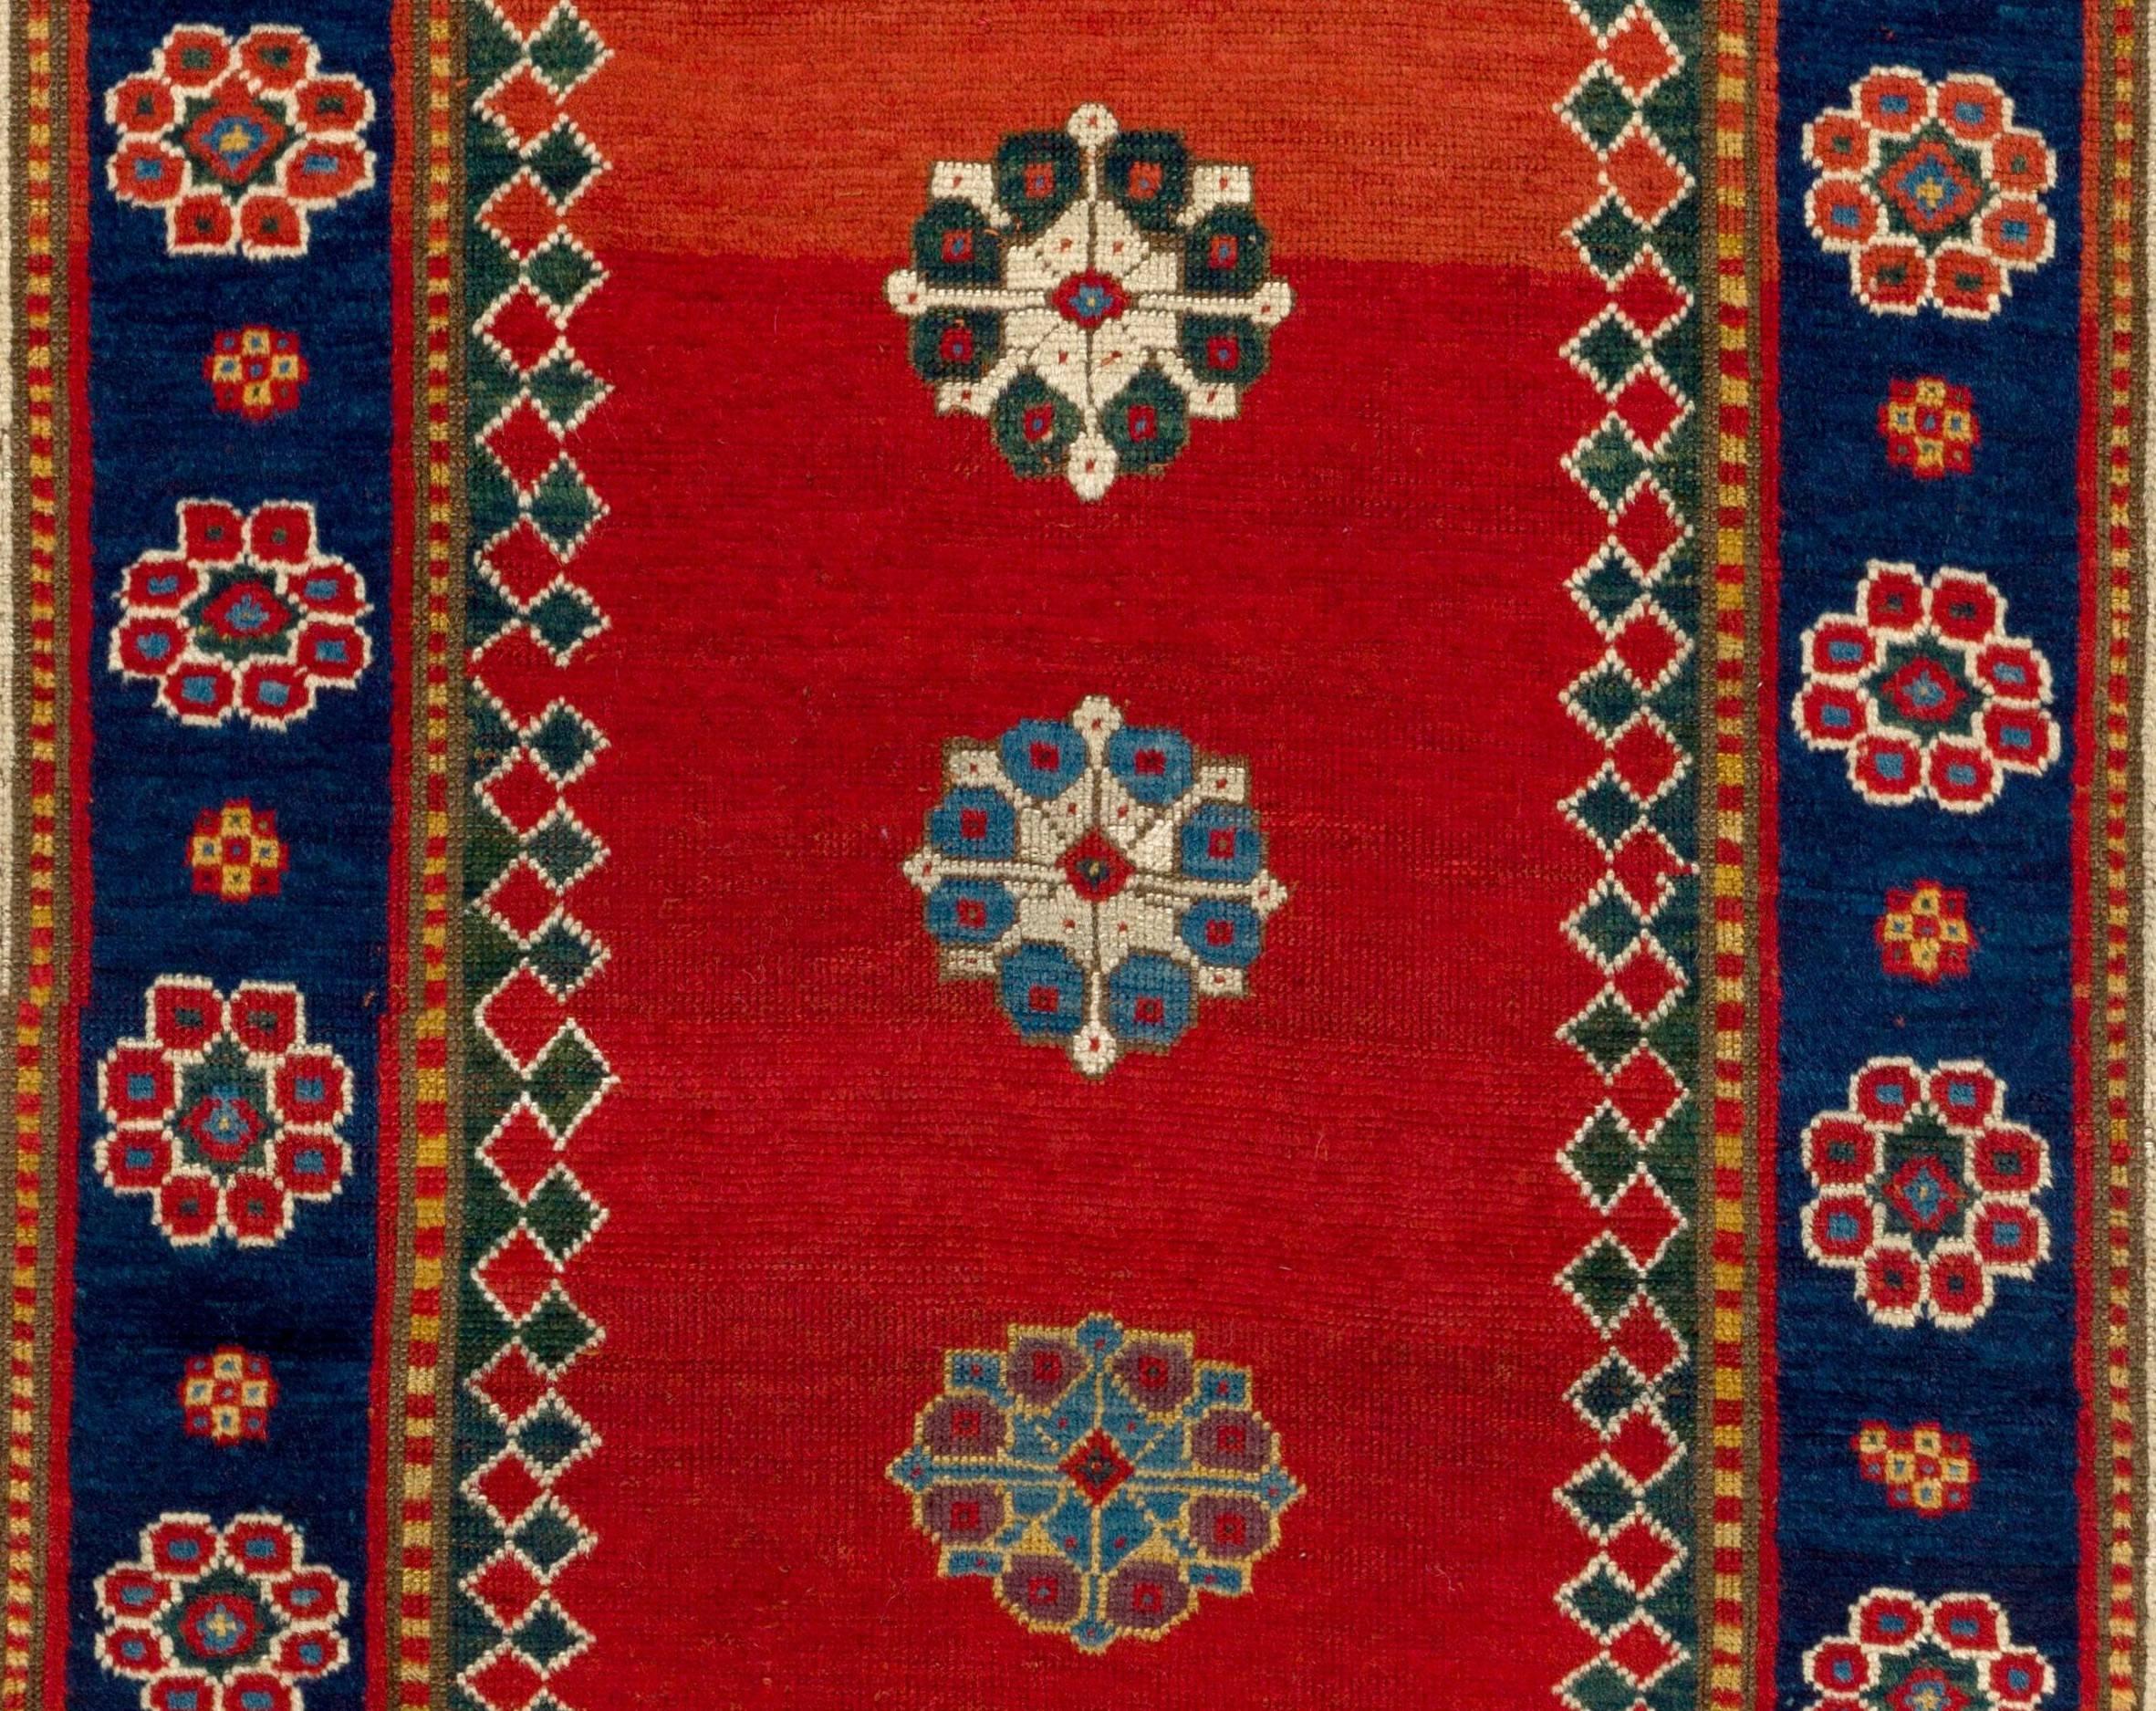 A unique and highly collectible Caucasian Kazak prayer rug with fantastic natural dyes. Lustrous medium wool pile on wool foundation. Dated in two places as 1287 in Hijri Calendar which is 1870 AD. The rug is in very good condition. Measures: 4 x 6